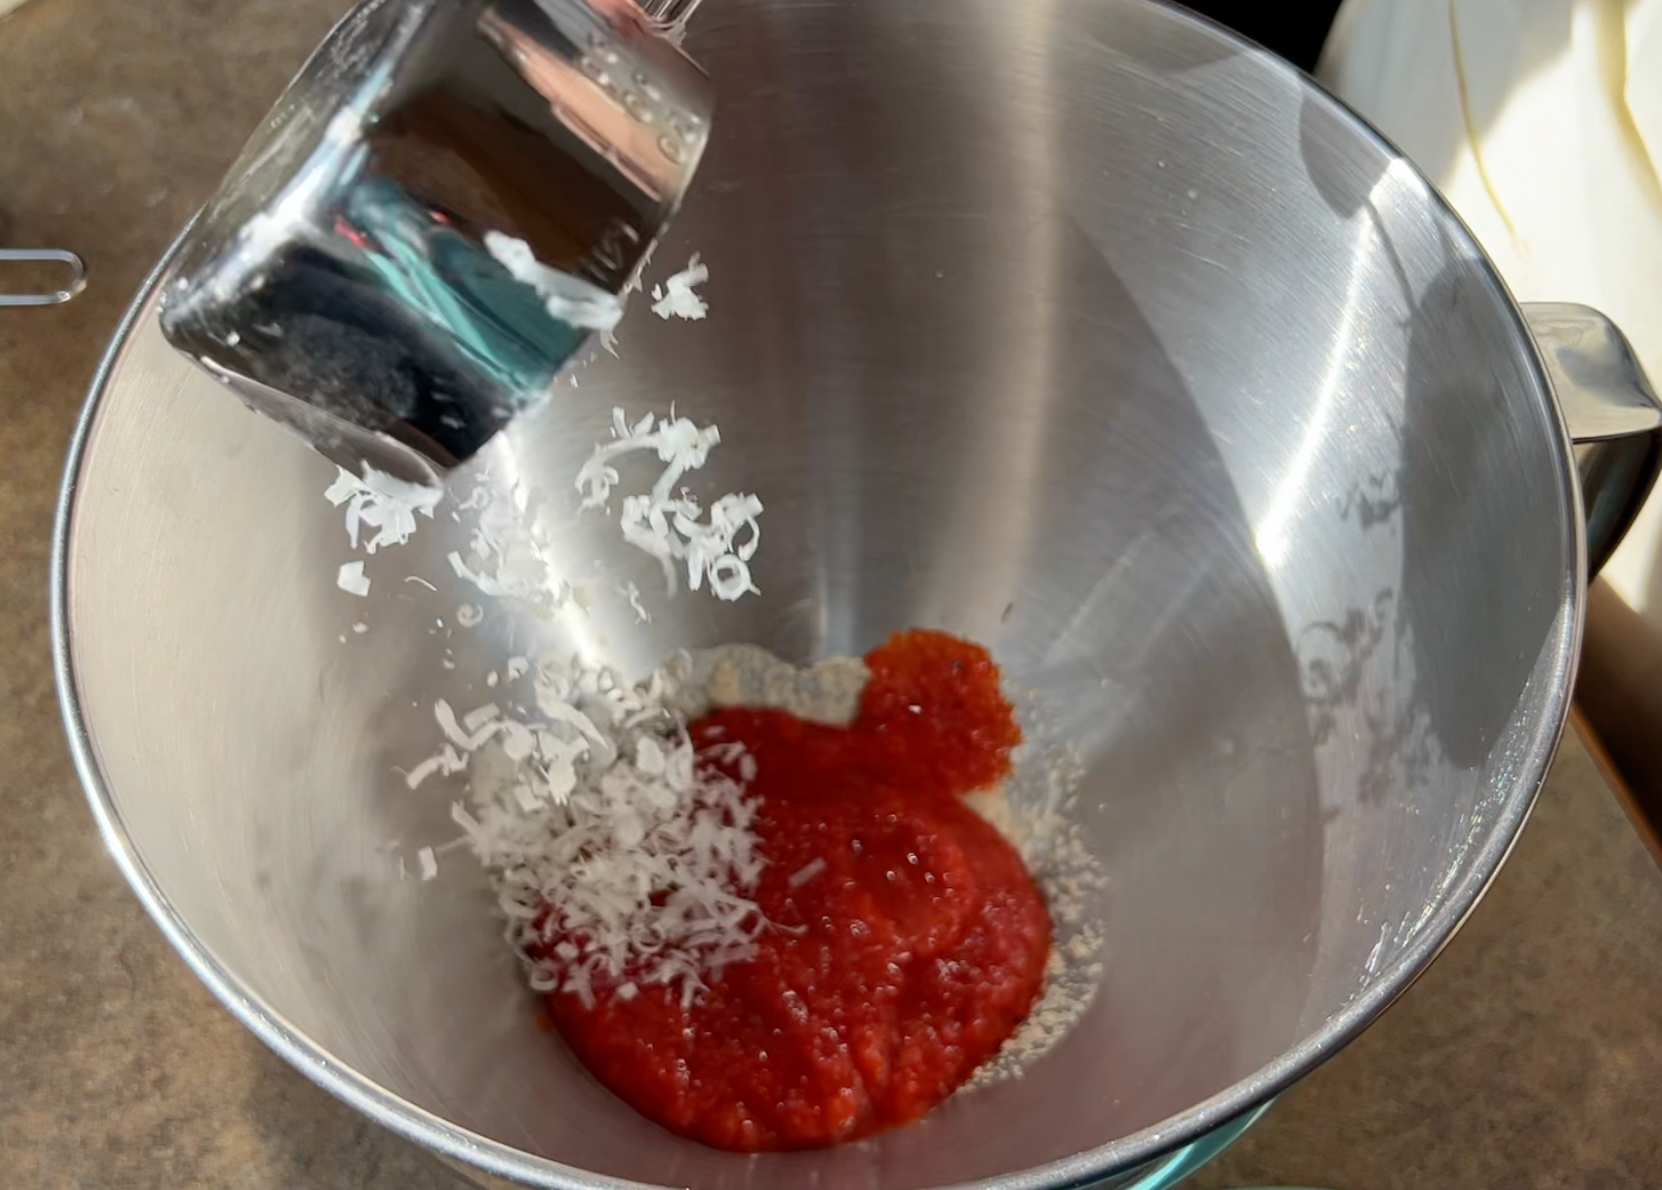 Pouring grated cheese into a stainless steel bowl with pureed red pepper